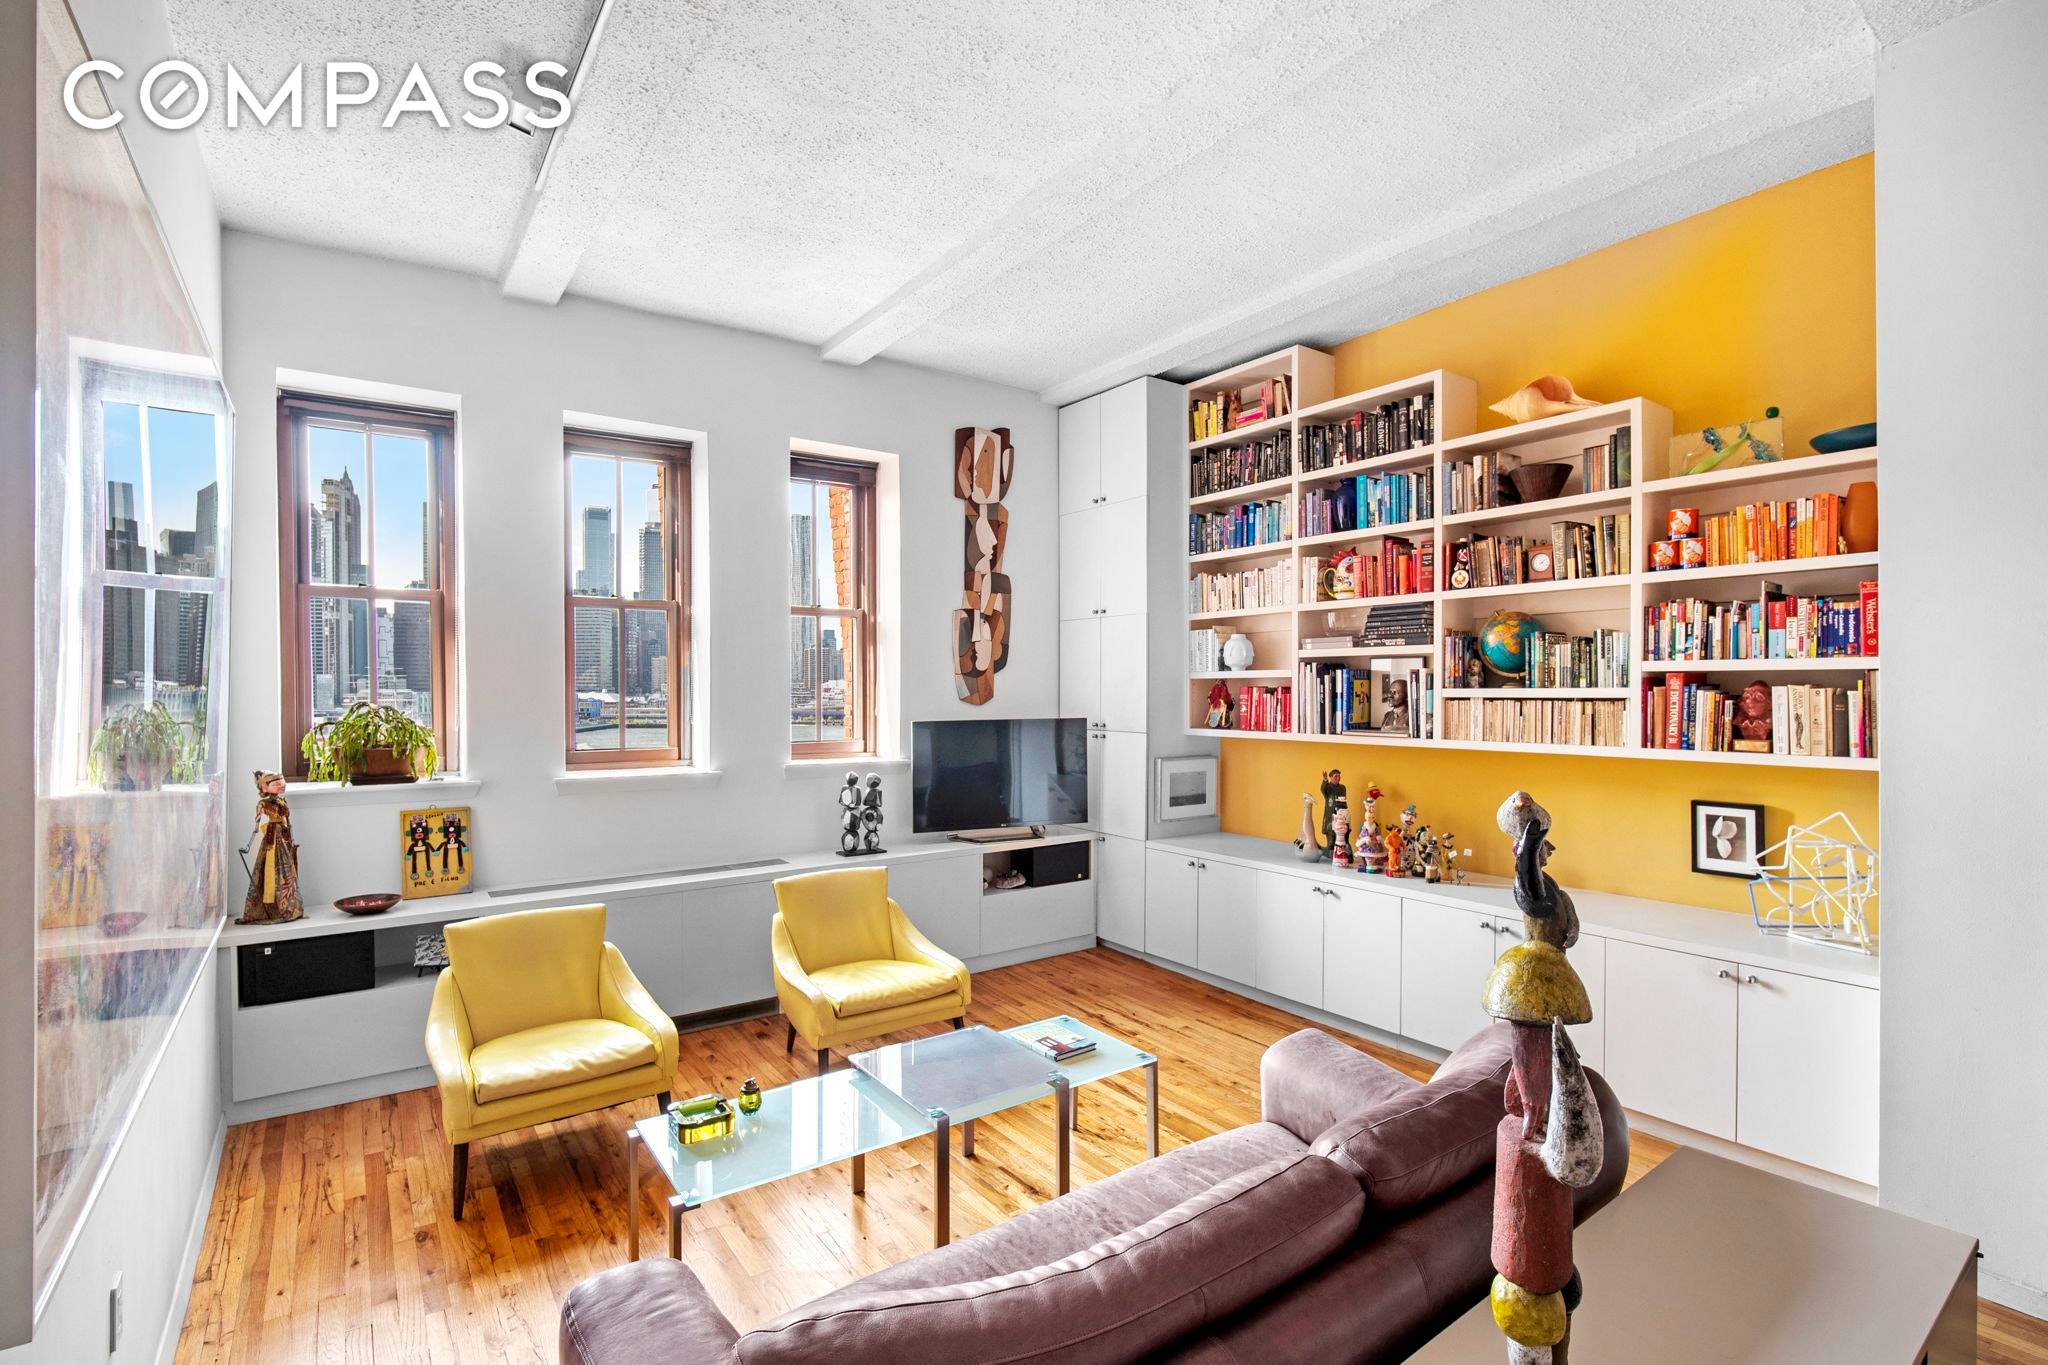 Big, bright, lofty and steeped in history, this 2BR 2Bath, high floor corner apartment in DUMBO has high ceilings, an ideal layout and Brooklyn Bridge Manhattan views.